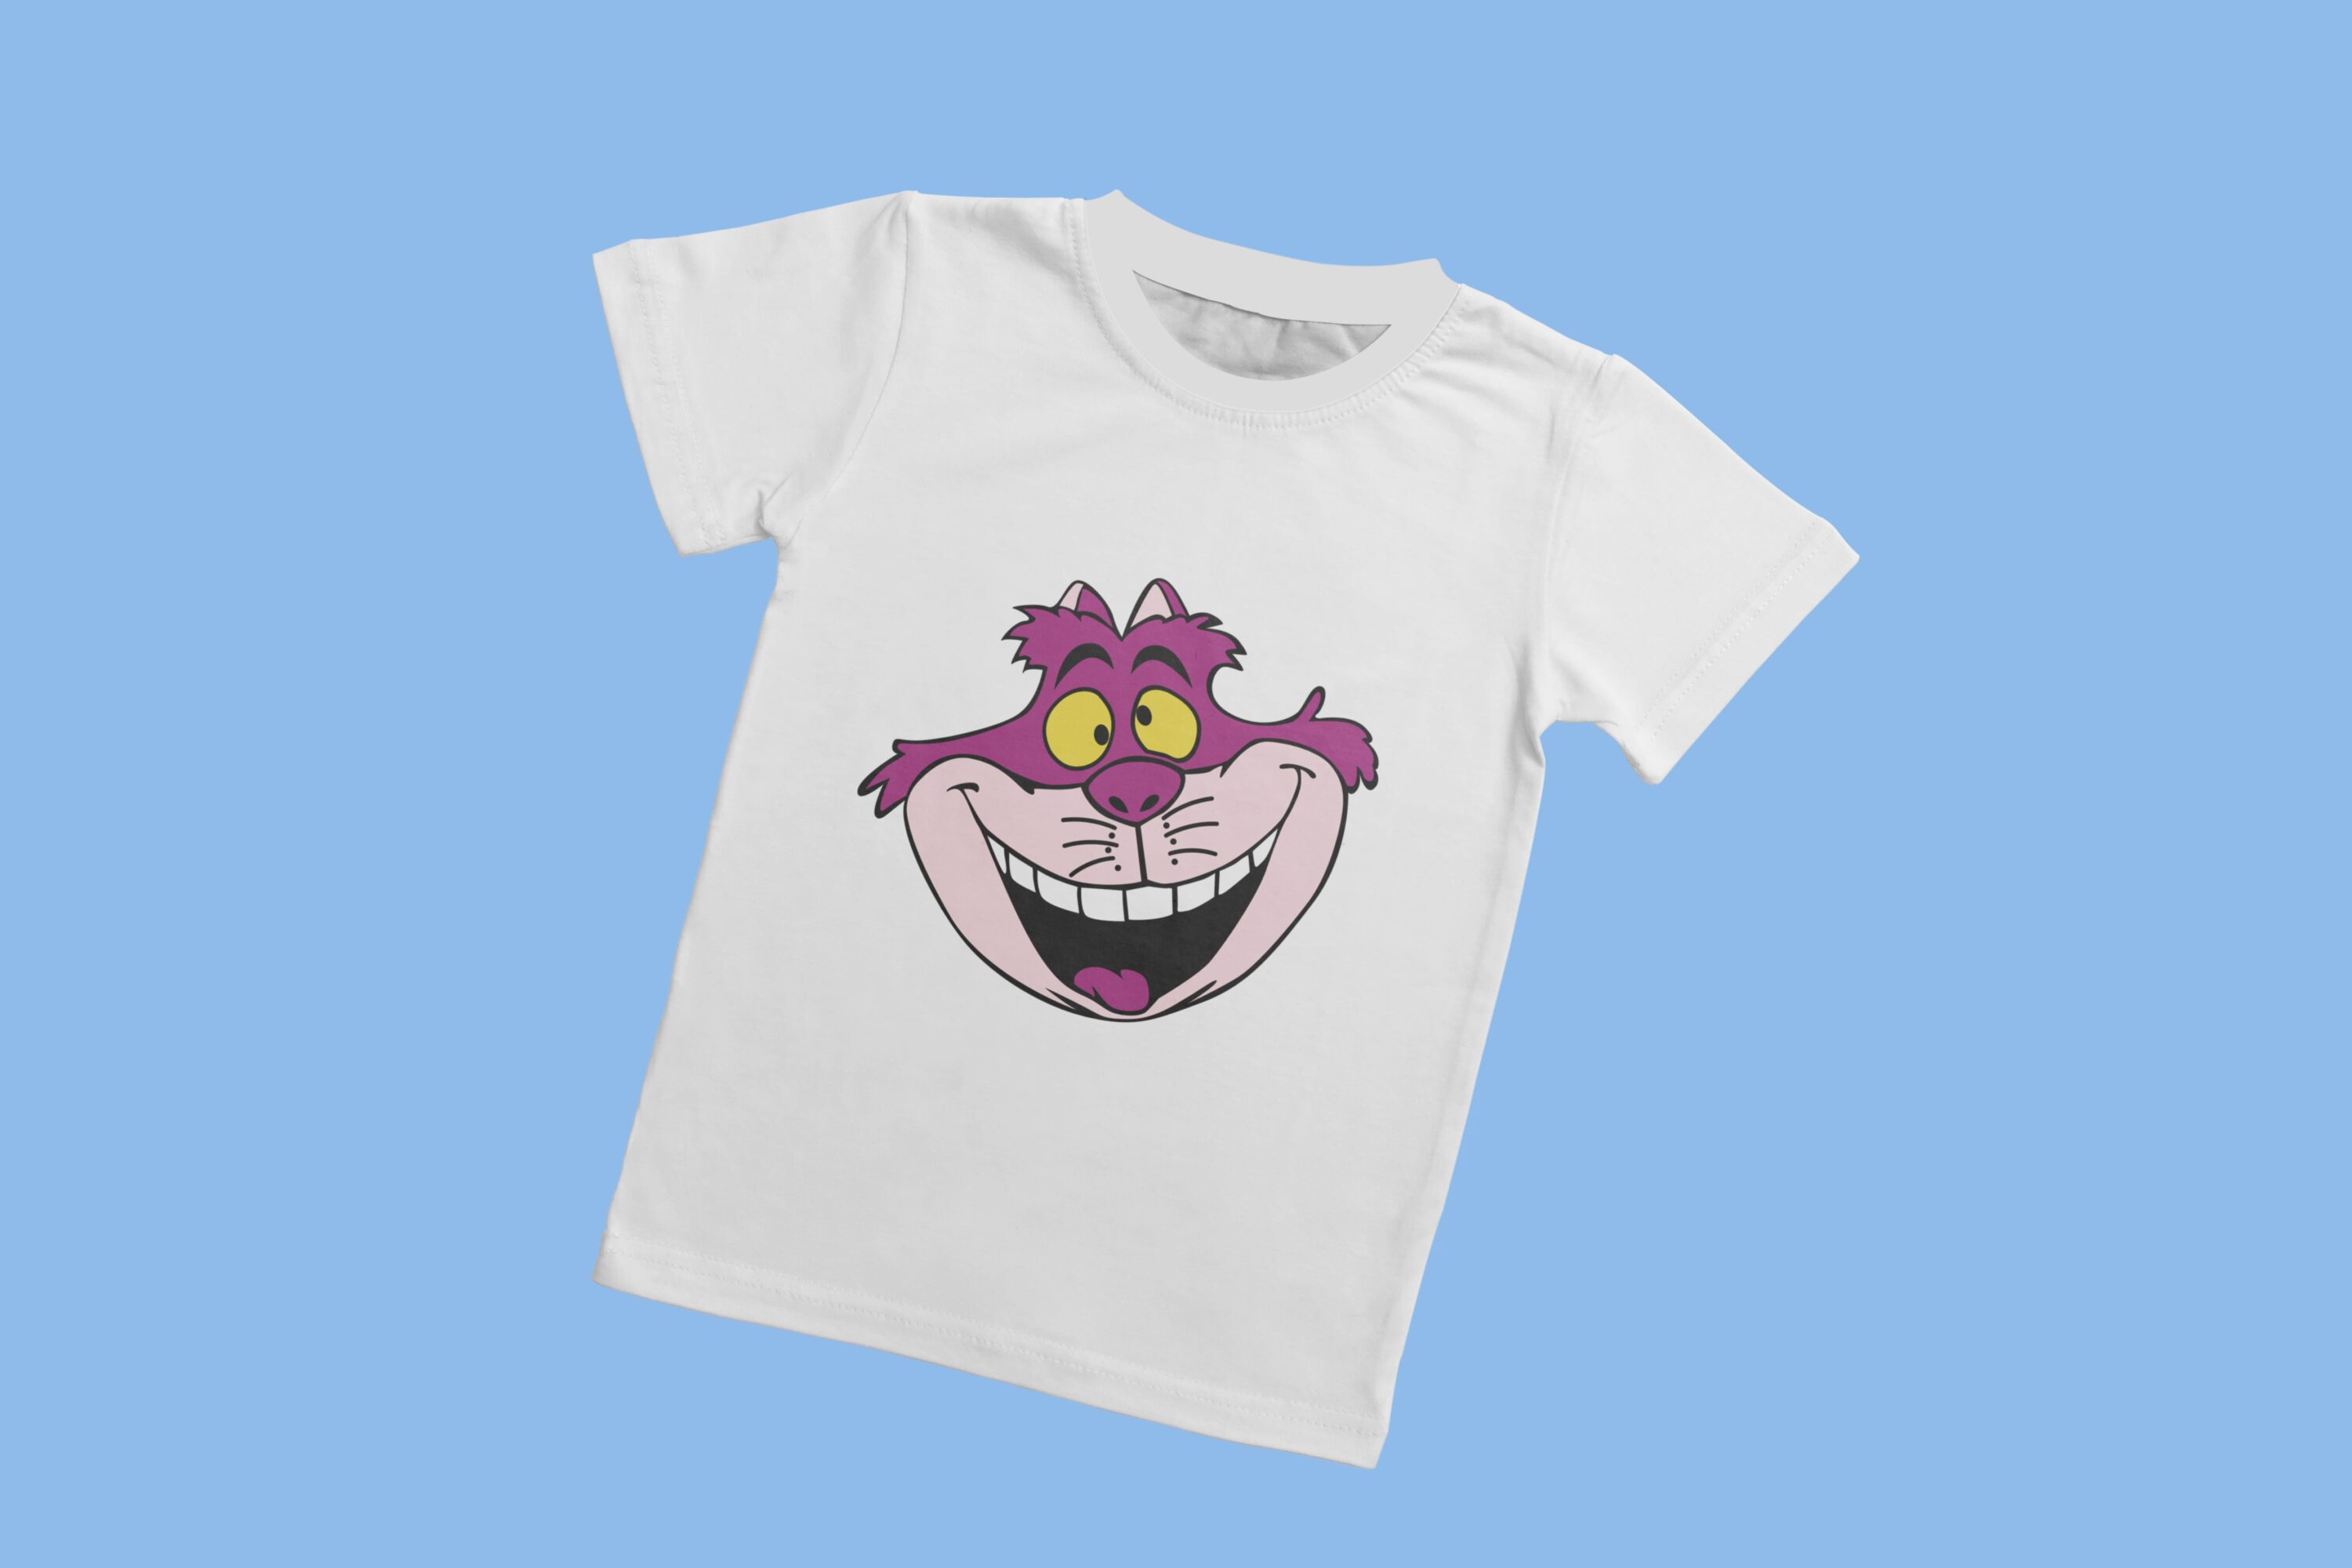 White T-shirt with a white collar and the face of a crazy Cheshire cat, on a blue background.